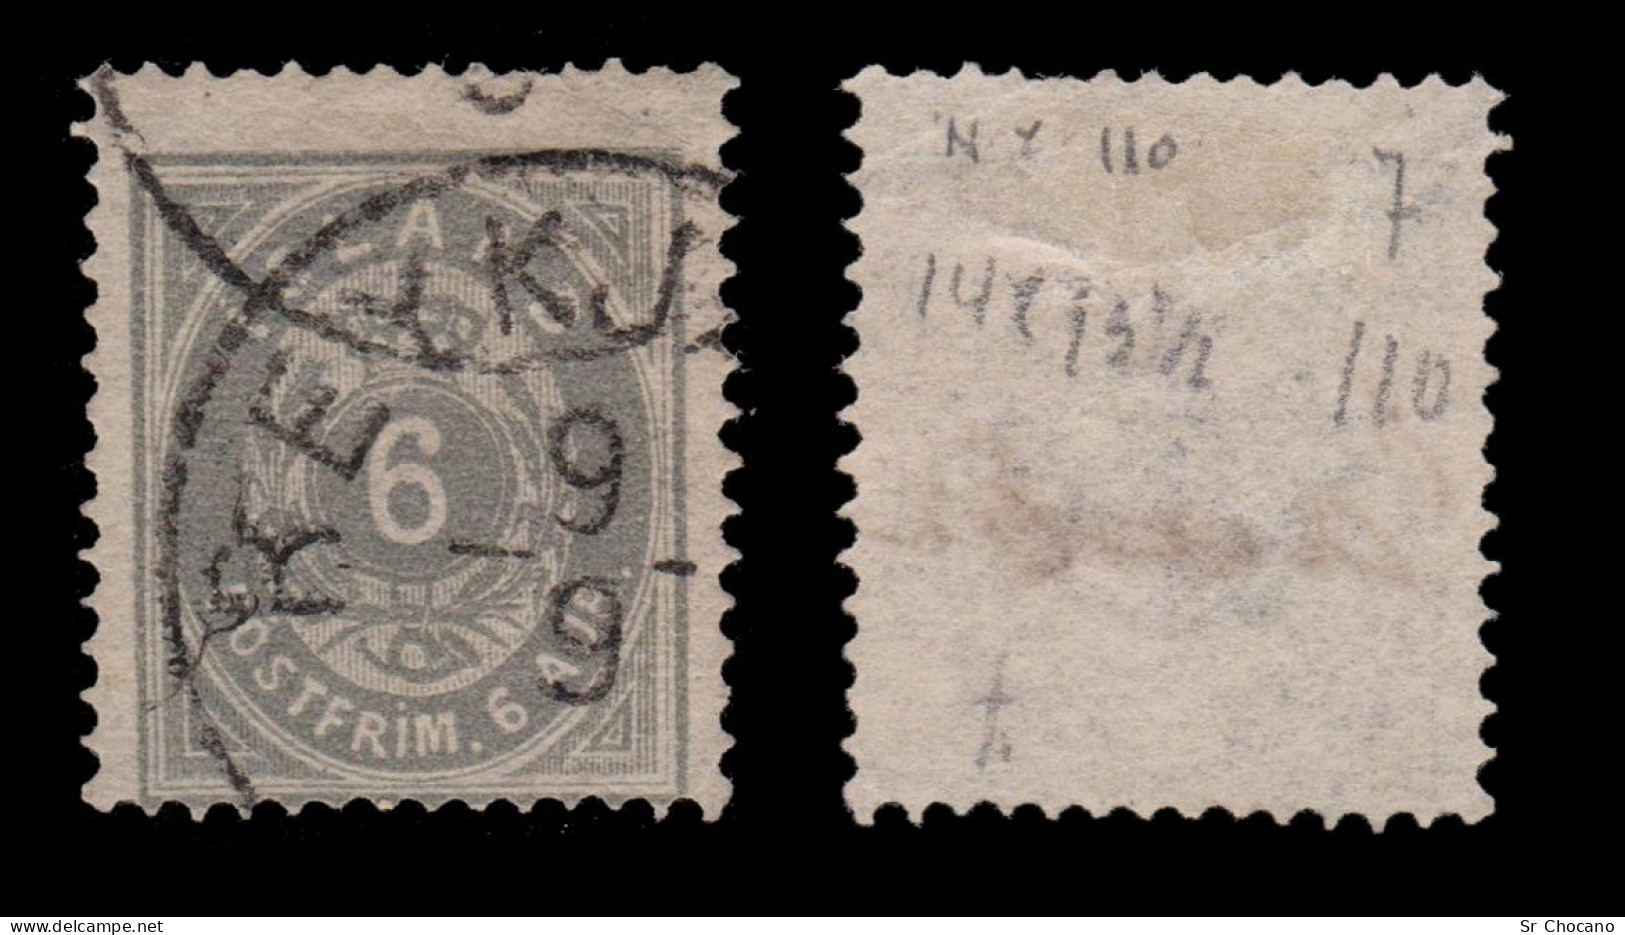 ICELAND STAMP.1876.6a.Scott.10.USED.Perf.14x13 ½ - Used Stamps